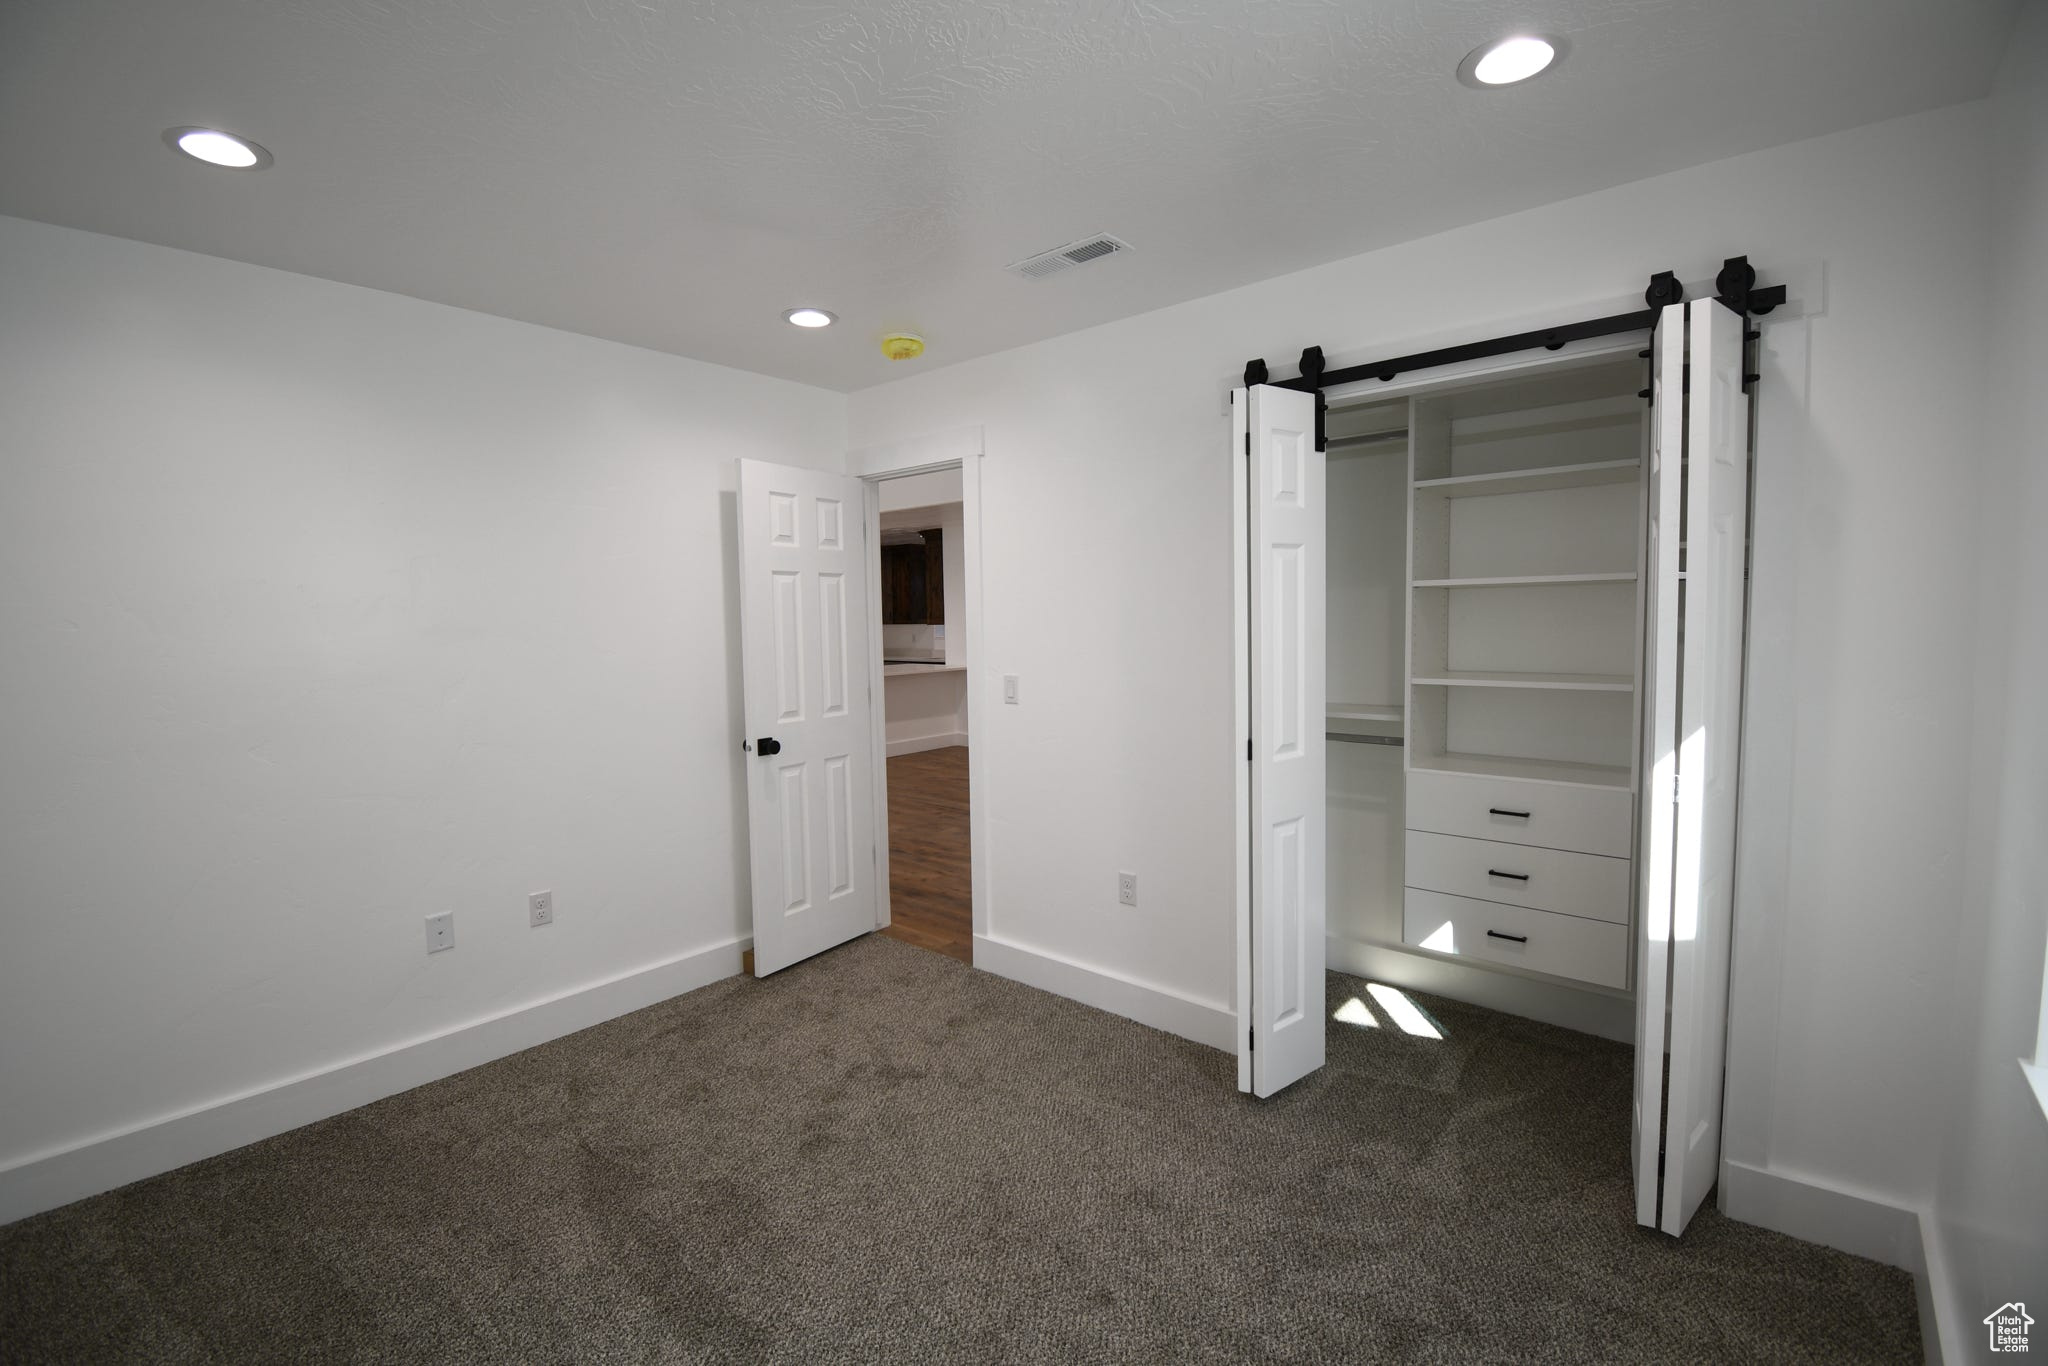 Unfurnished bedroom featuring dark colored carpet, a barn door, and a closet